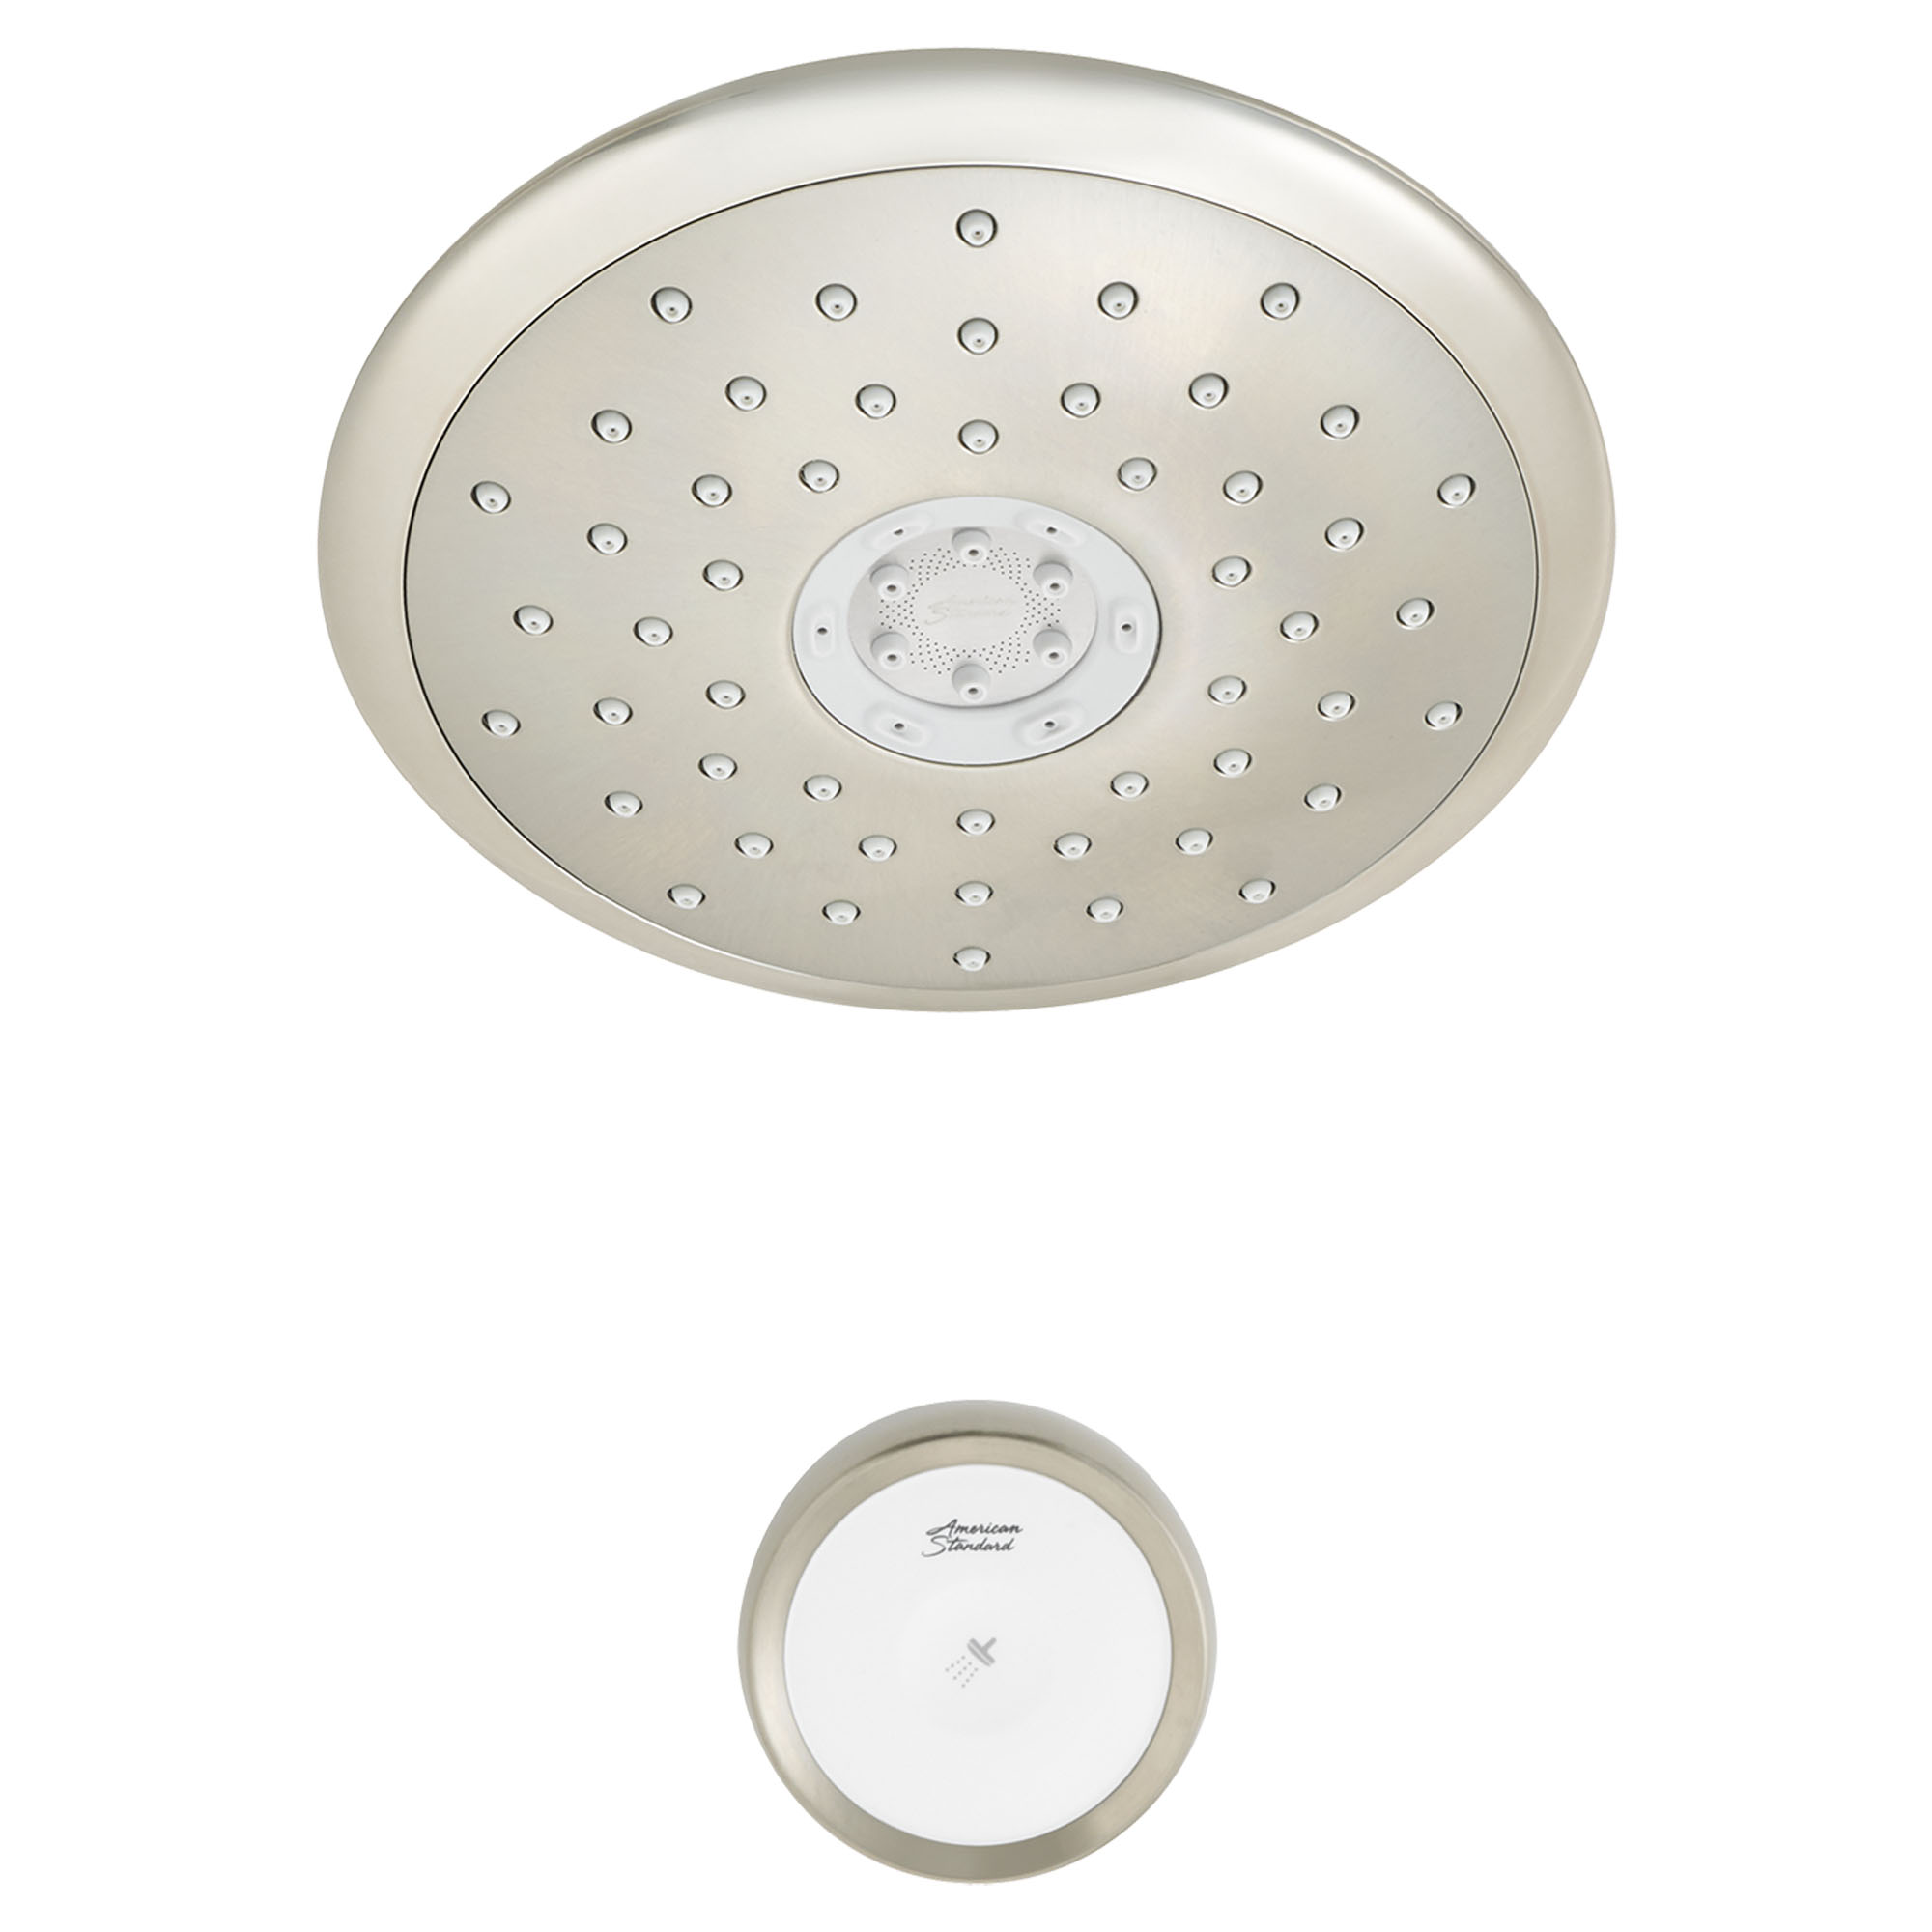 Spectra™ eTouch 7-Inch 1.8 gpm/6.8 L/min Water-Saving Fixed Showerhead